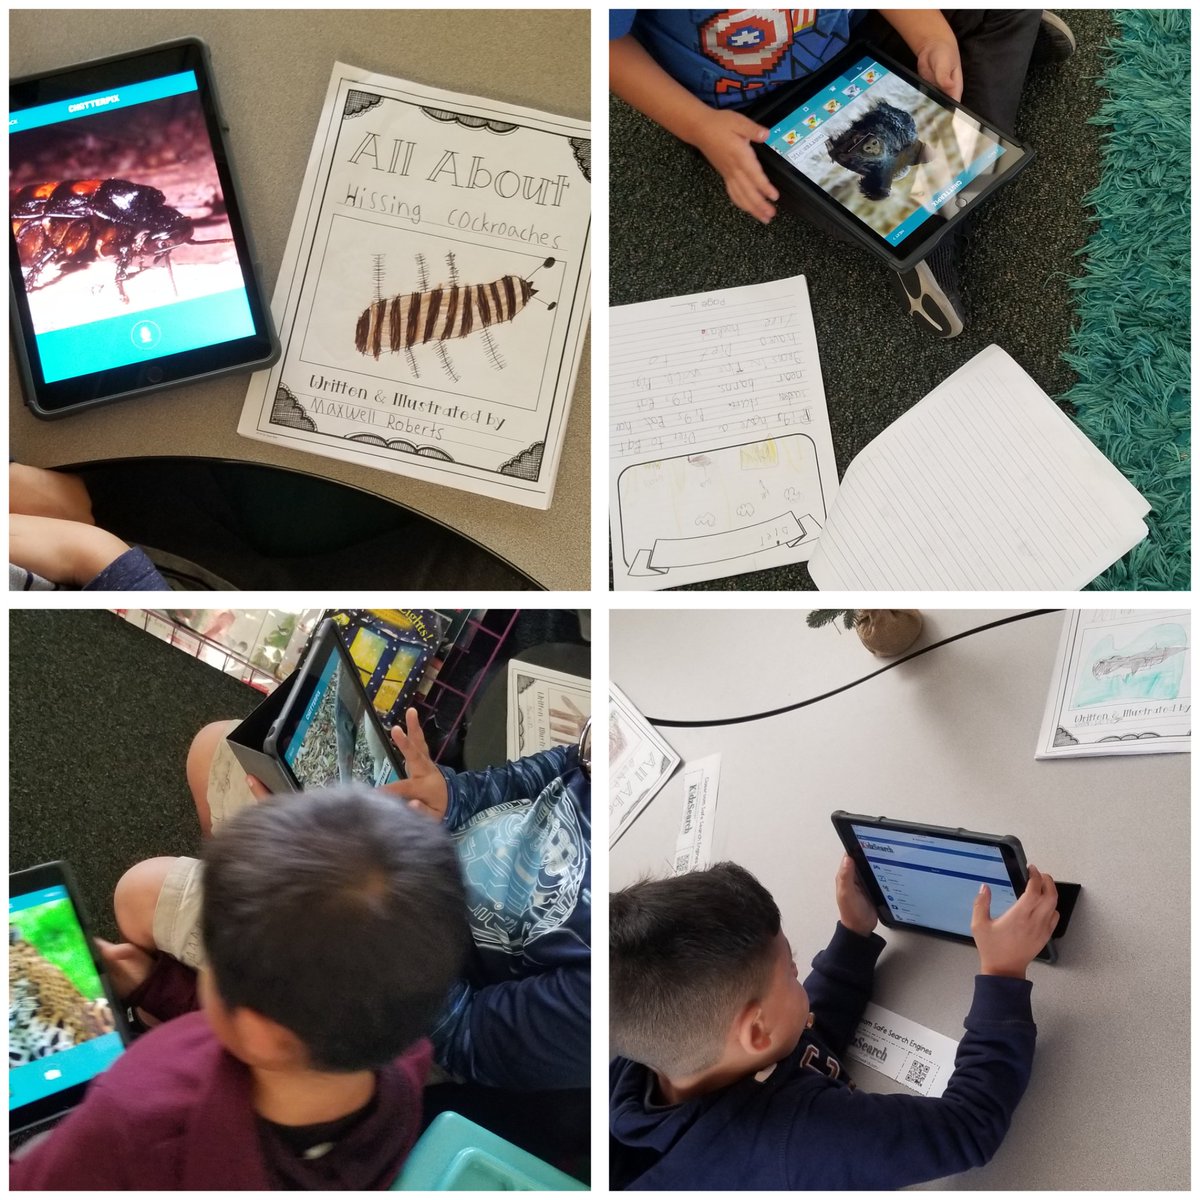 Ss are bringing their All About Books to life by publishing with @ChatterPixIt talking animals what could be better #WeAreTUSD #TUSDThrives @TeamLomaVista @tustinconnect 🐖🦒🦈🐊 #nonfictionwriting